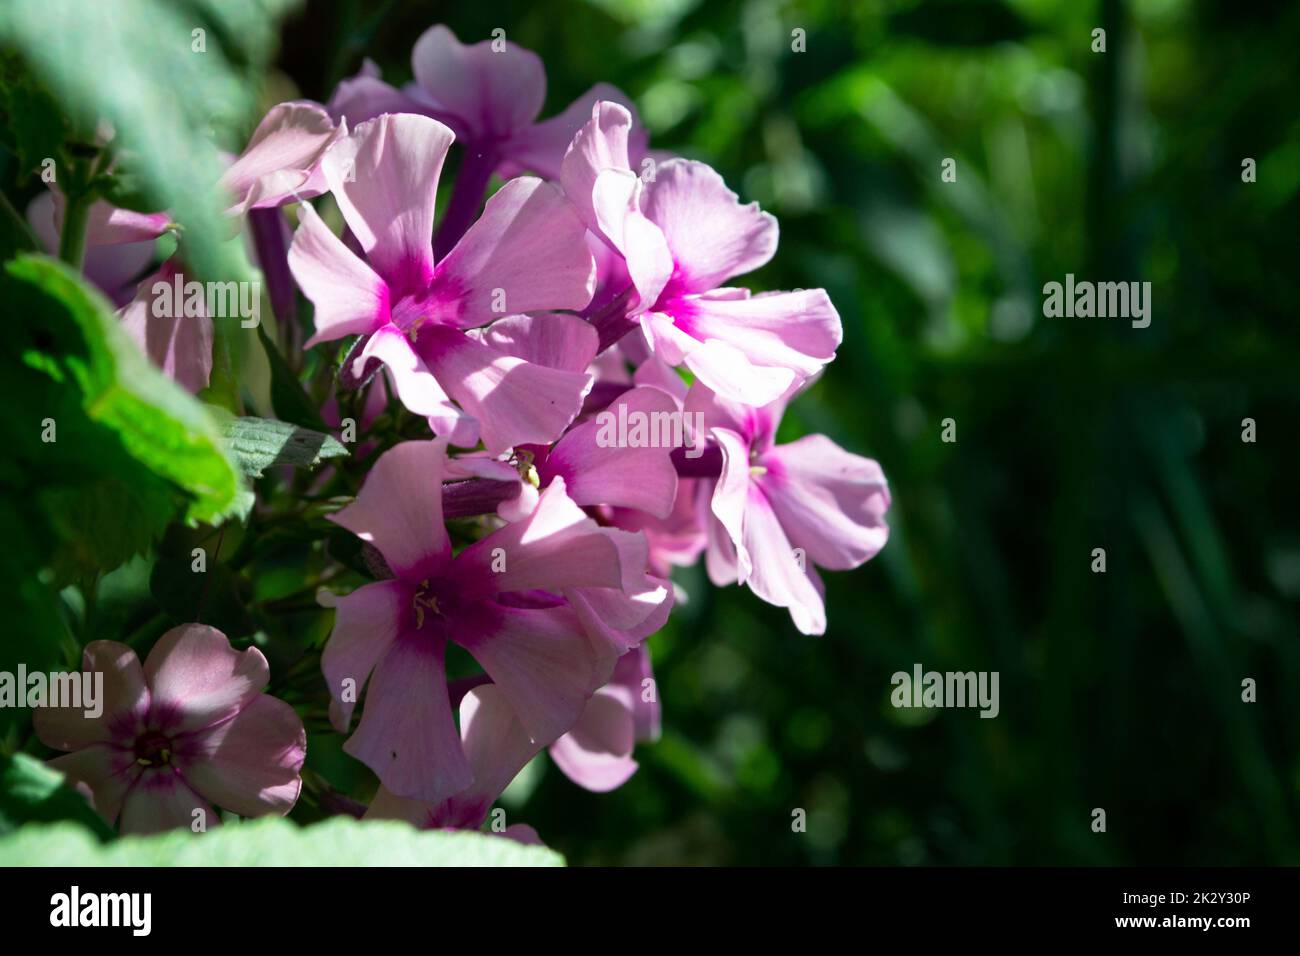 Blooming pink or violet phlox flower macro on a summer sunny day. Purple phloxes flowers close up photo in the summer garden. A flowering plant in sunlight with pink petals floral background. Stock Photo